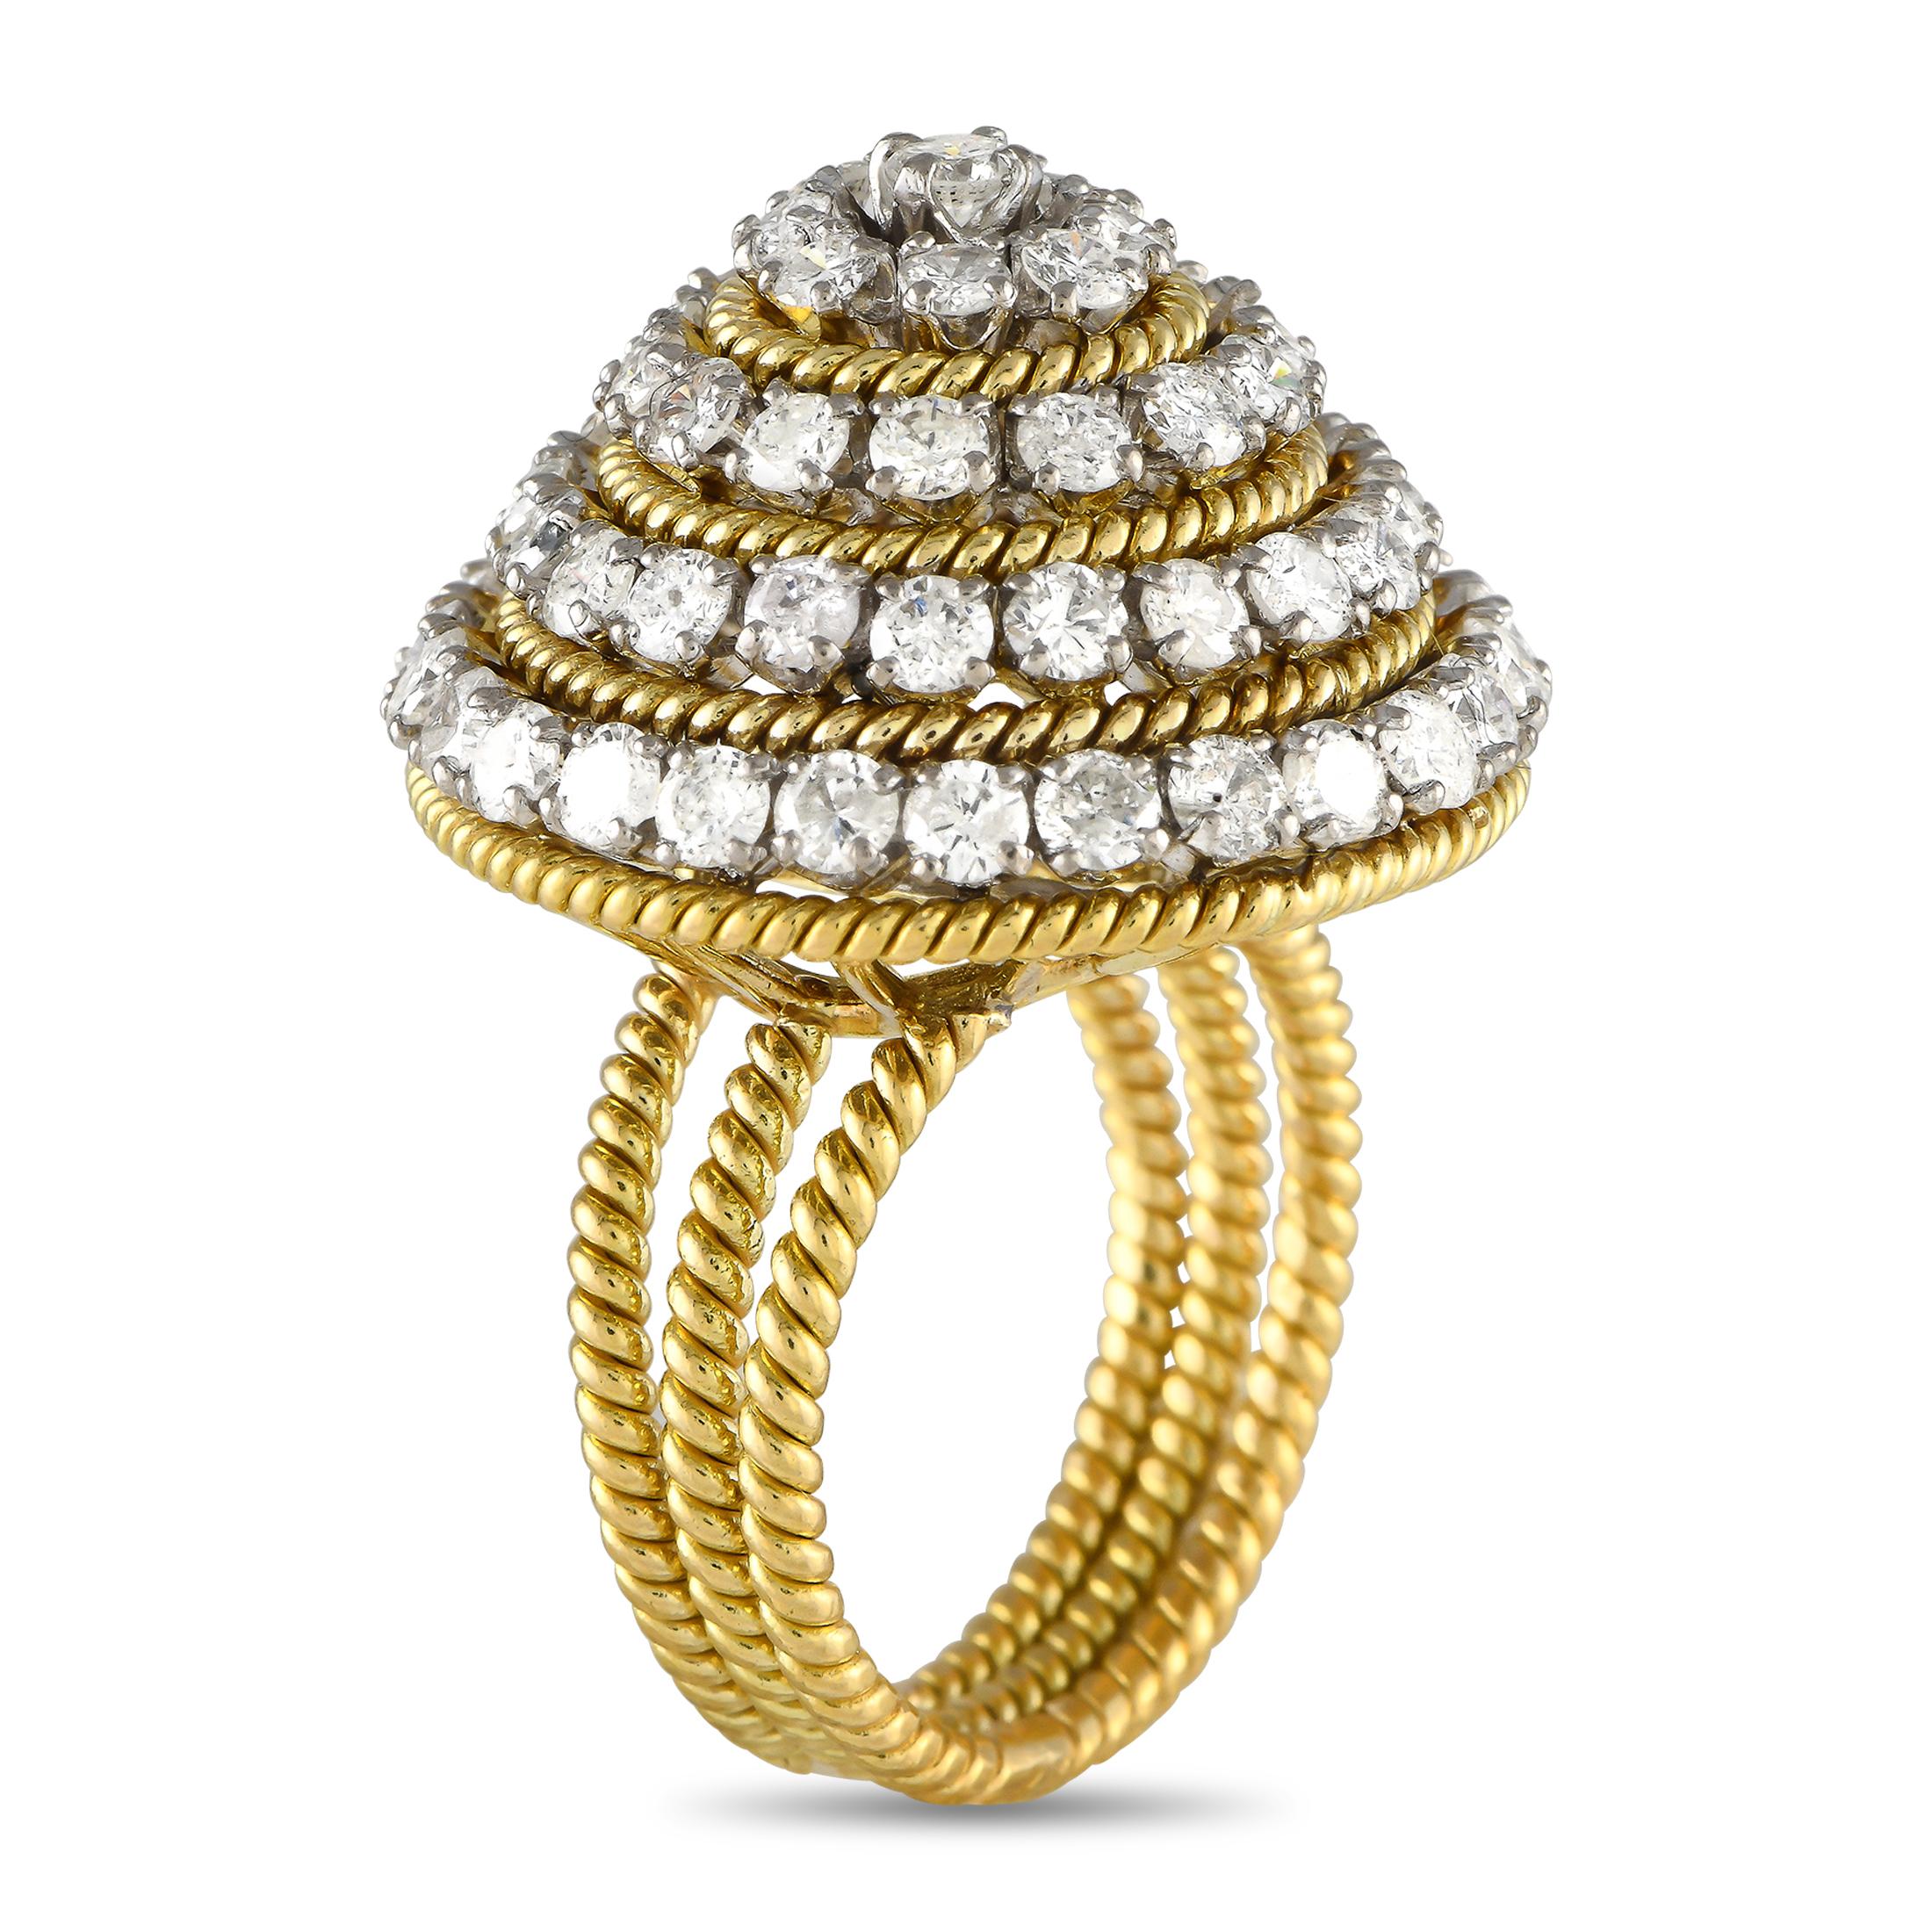 You'll be at the peak of style with this statement ring. It features a trio of rope-style bands topped with a mountain of diamonds. The pyramidal centerpiece features an alternating pattern of round diamonds and rope-style yellow gold trims. The